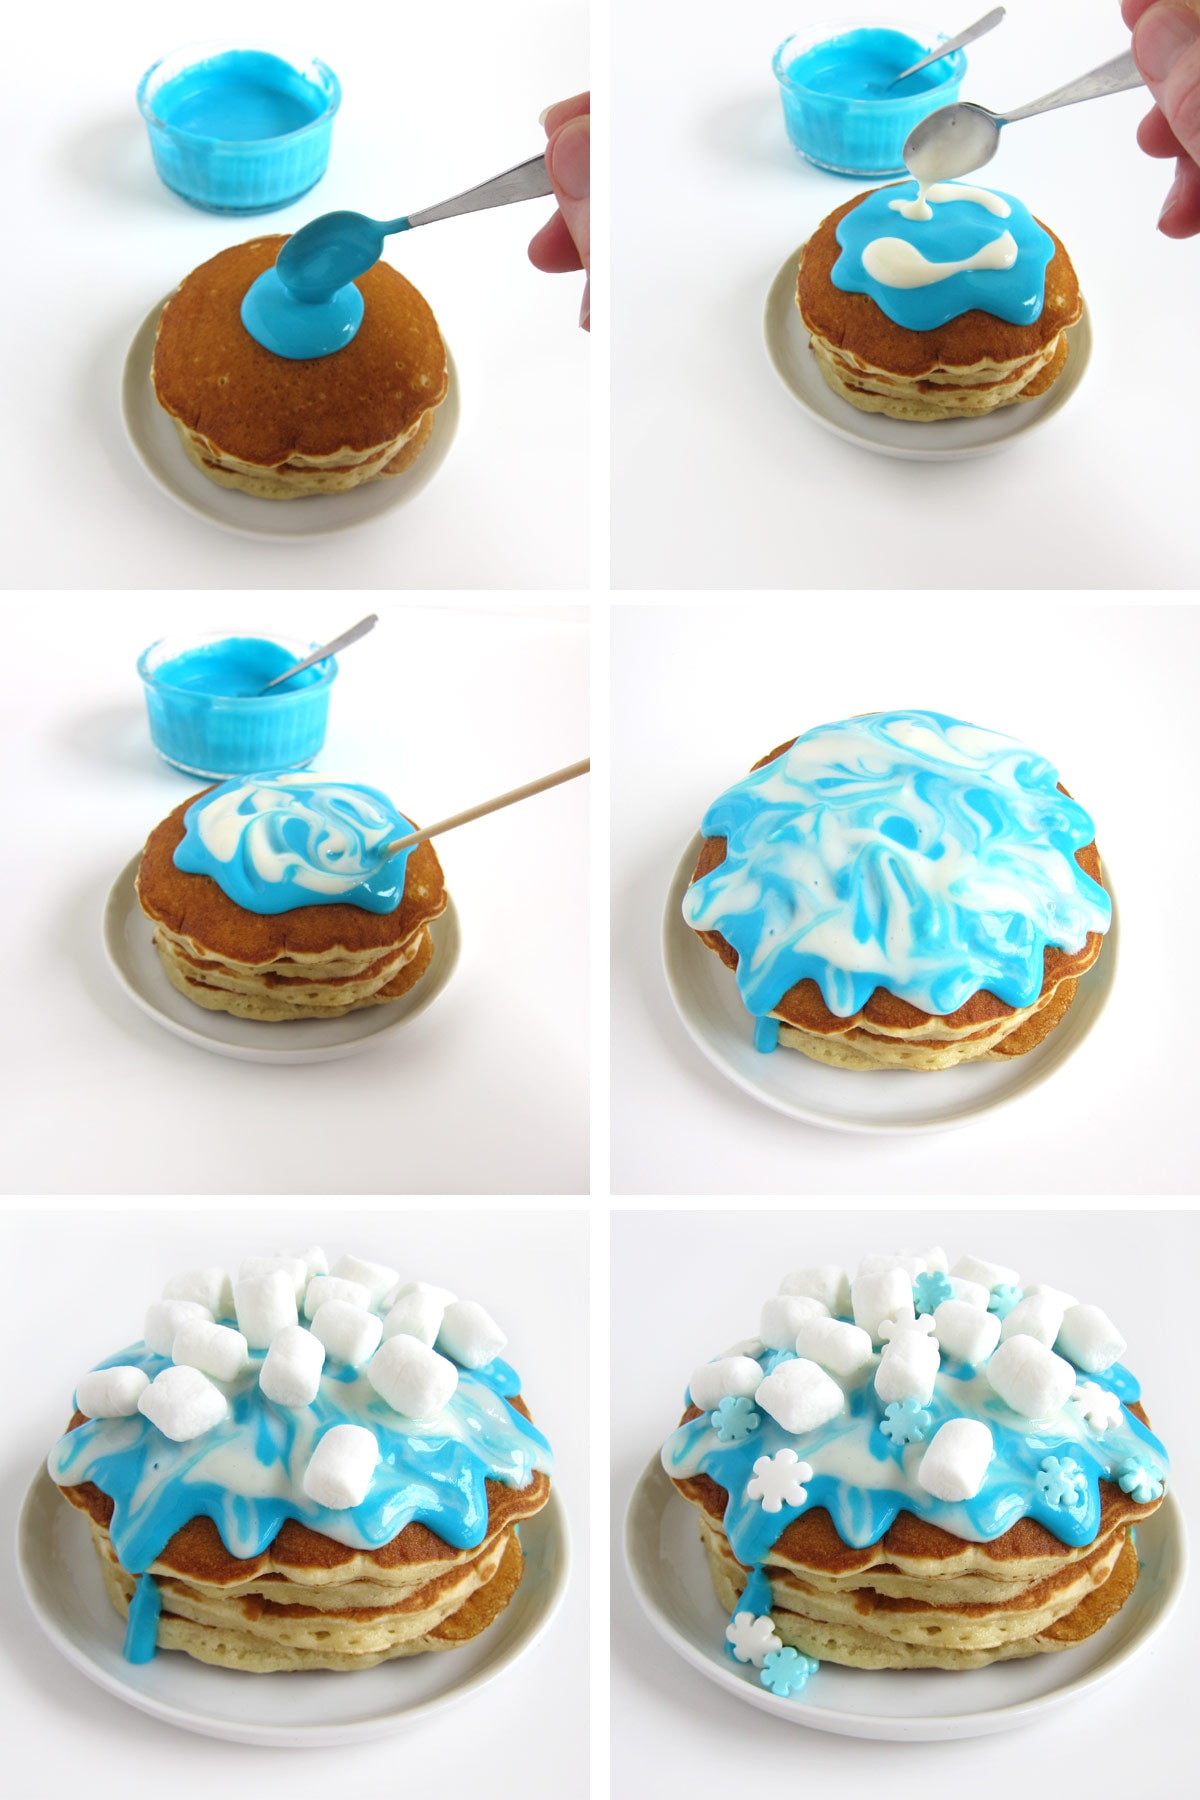 Frosting a stack of pancakes with a swirl of blue and white icing and topping it with marshmallows and snowflakes.